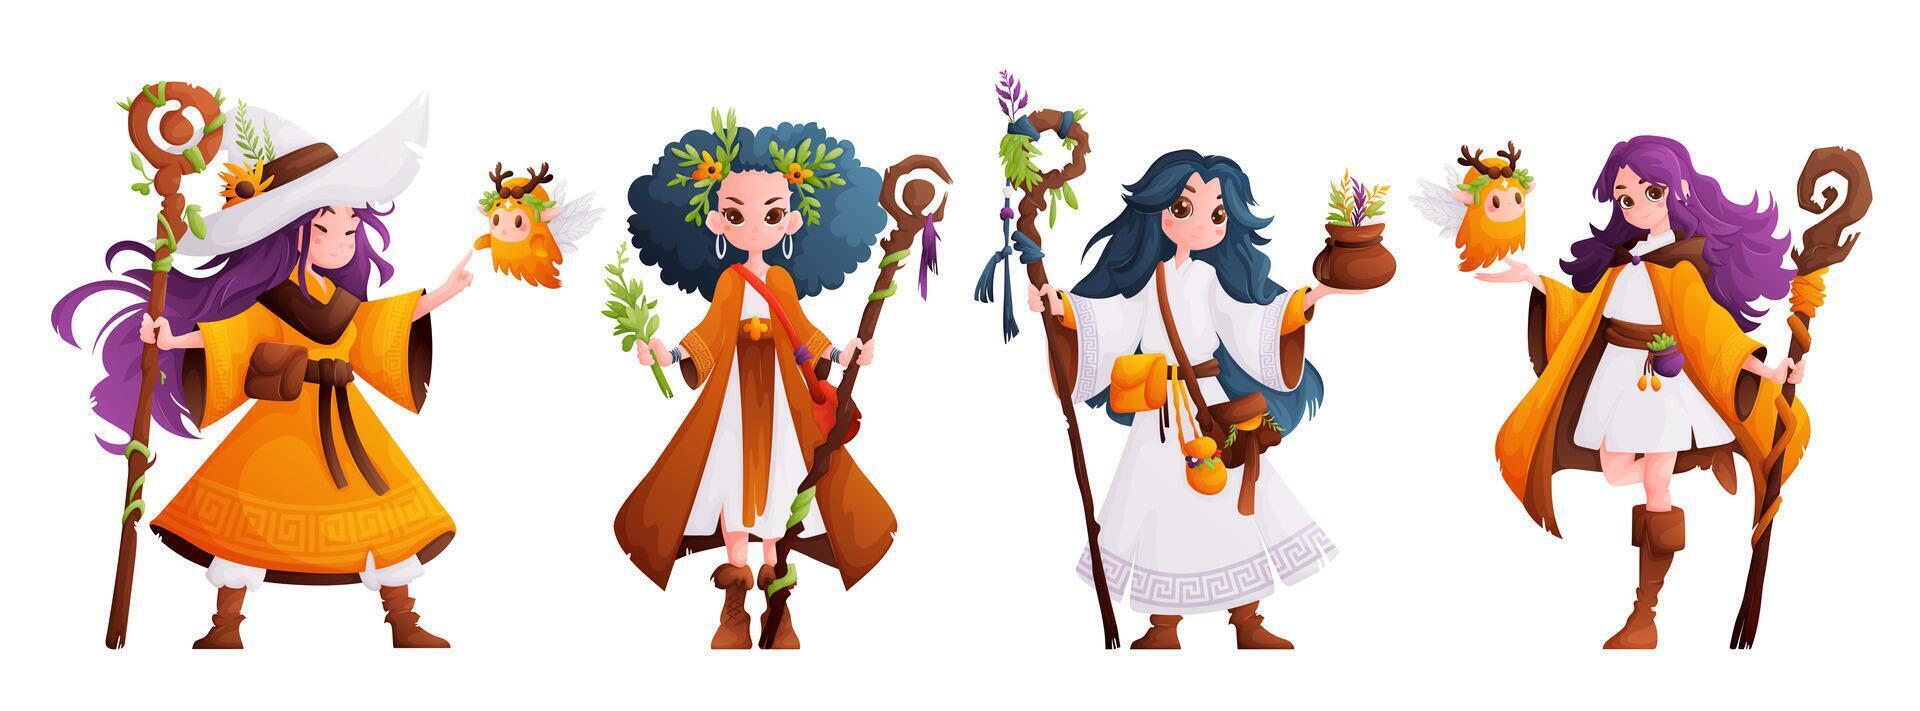 A set of four girls, guardians of the forest. Woman druid, herbalist or healer with a wooden staff. Forest keeper and curious woodland spirit. Cartoon style, vector illustration